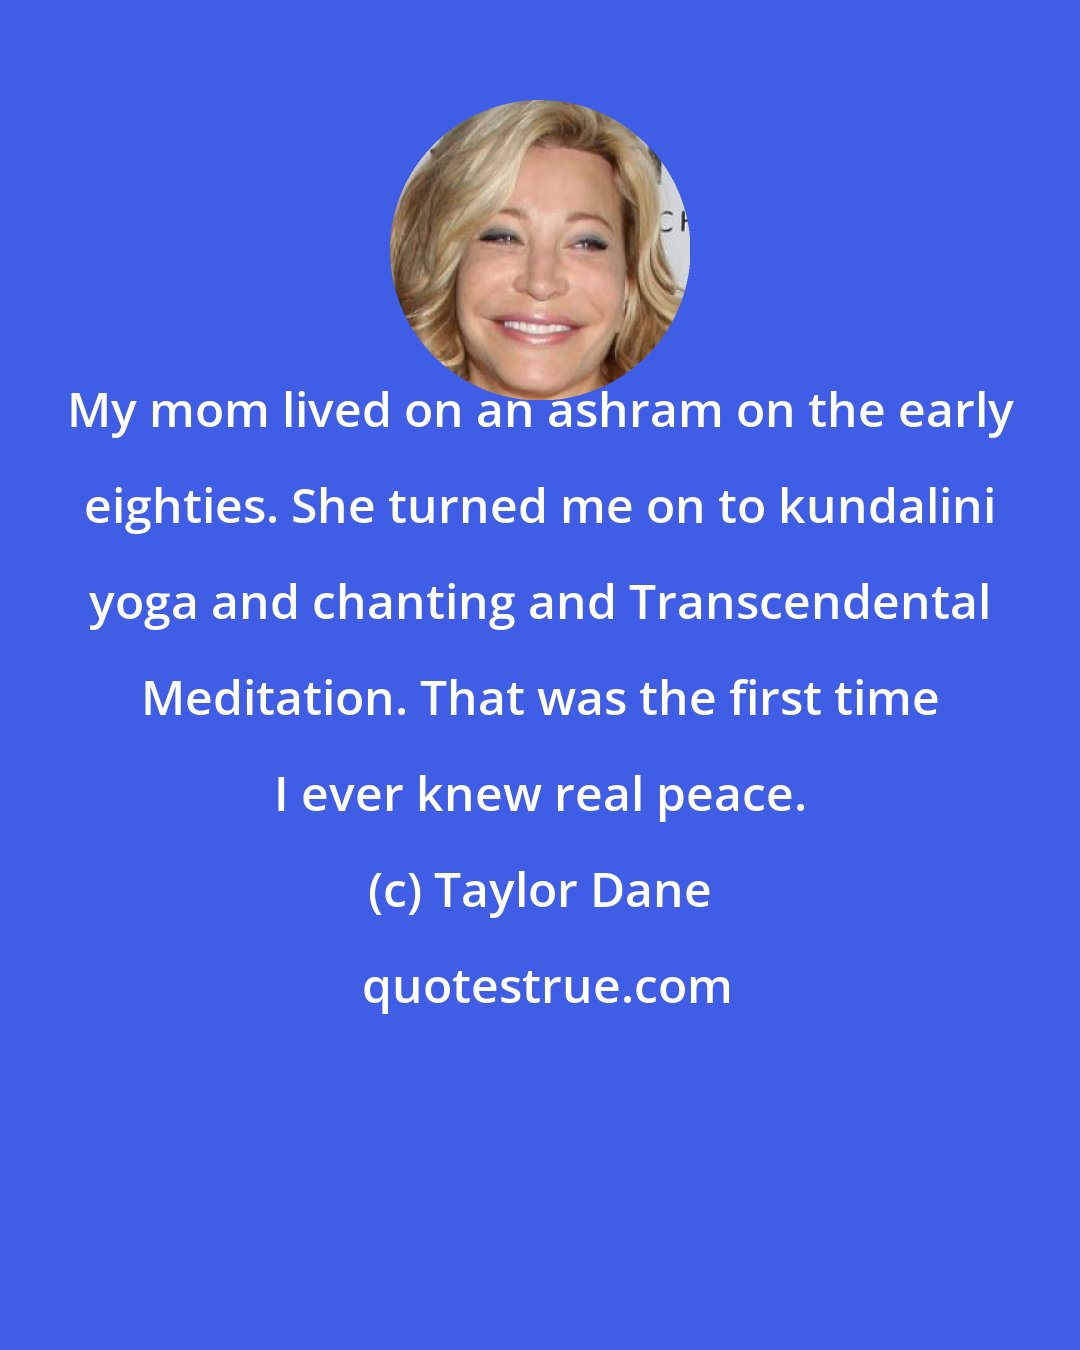 Taylor Dane: My mom lived on an ashram on the early eighties. She turned me on to kundalini yoga and chanting and Transcendental Meditation. That was the first time I ever knew real peace.